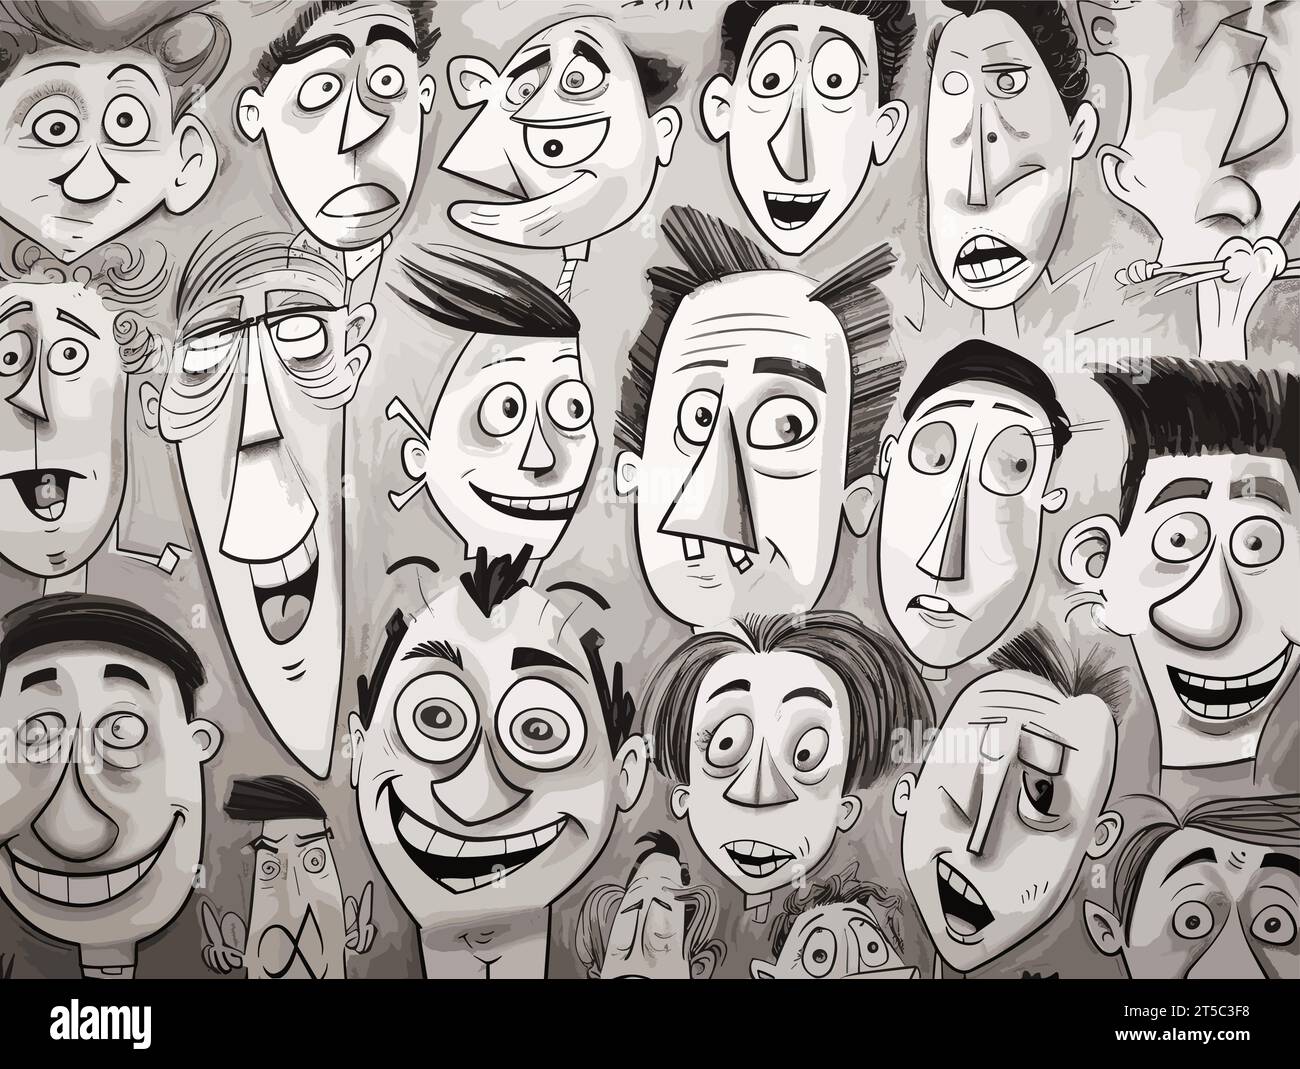 Drawing of Collection of cartoon character faces illustration separated, sweeping overdrawn lines. Stock Vector